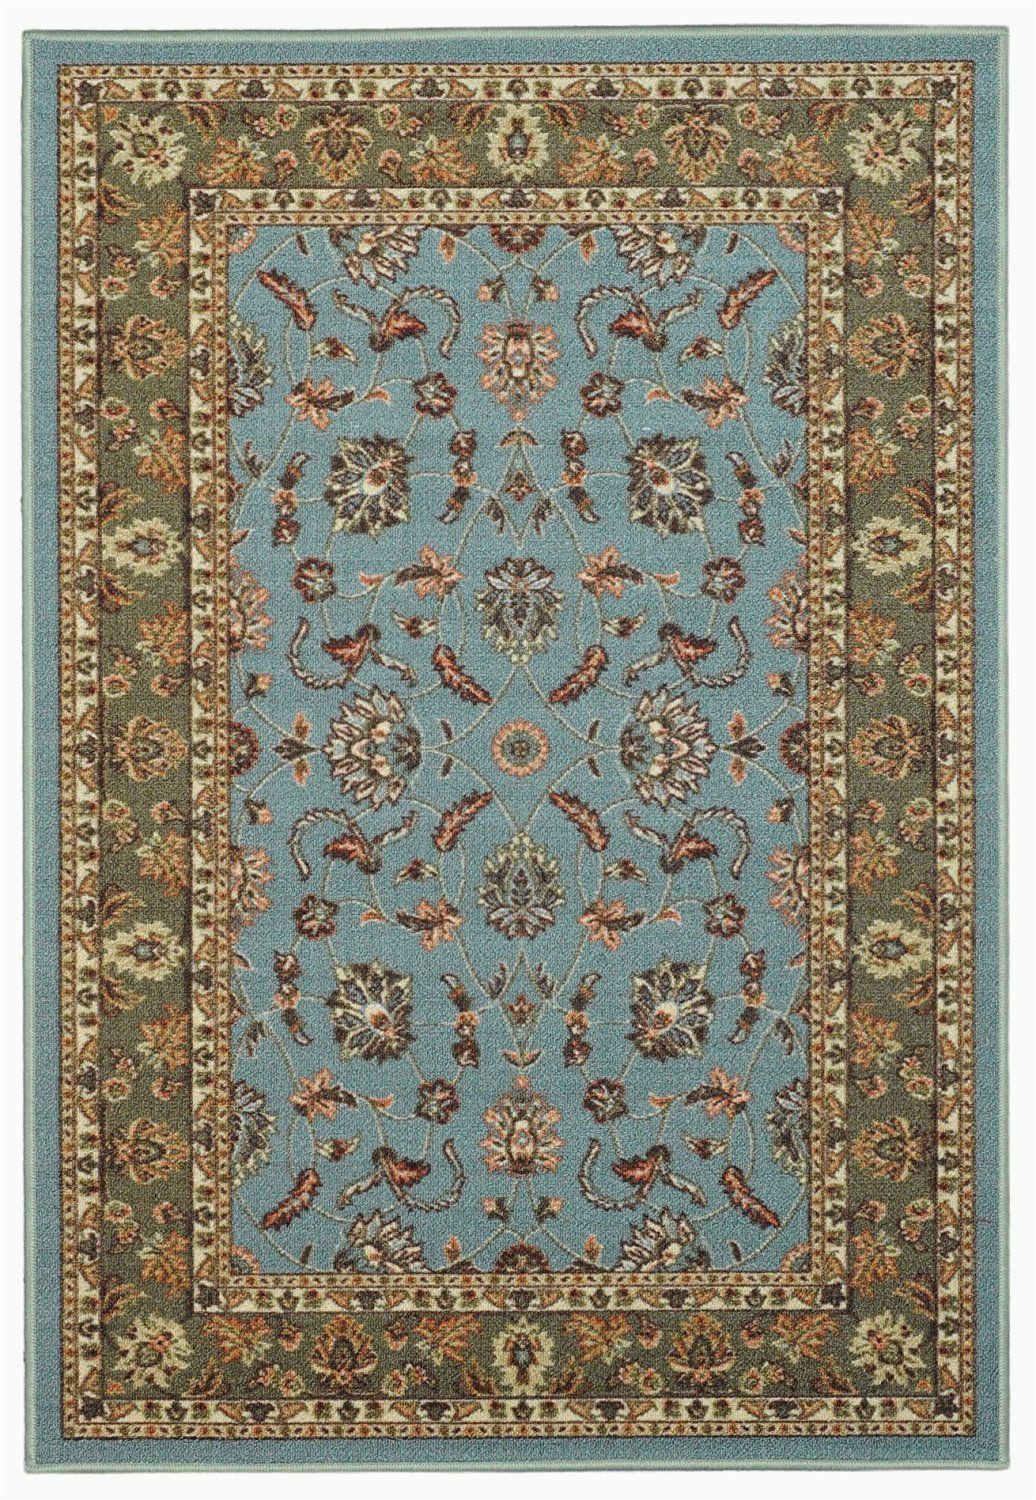 5×7 Rubber Backed area Rug Maxy Home Hamam Collection Ha 5086 Non Skid Rubber Back